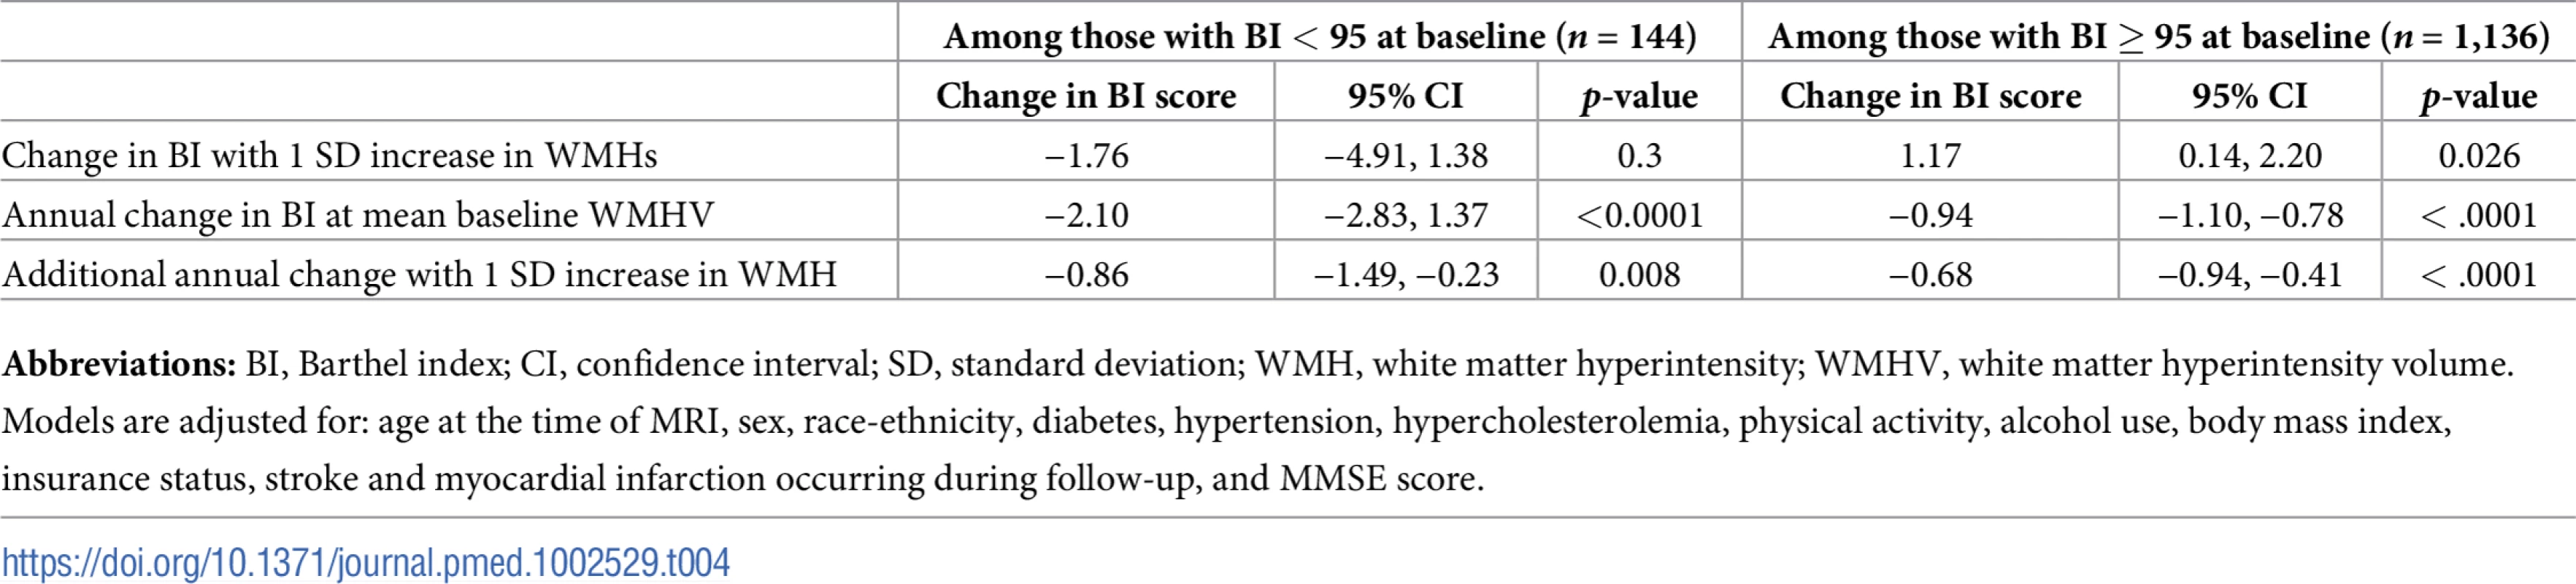 Associations between whole brain WMHV and functional status stratified by baseline BI score, in adjusted models.